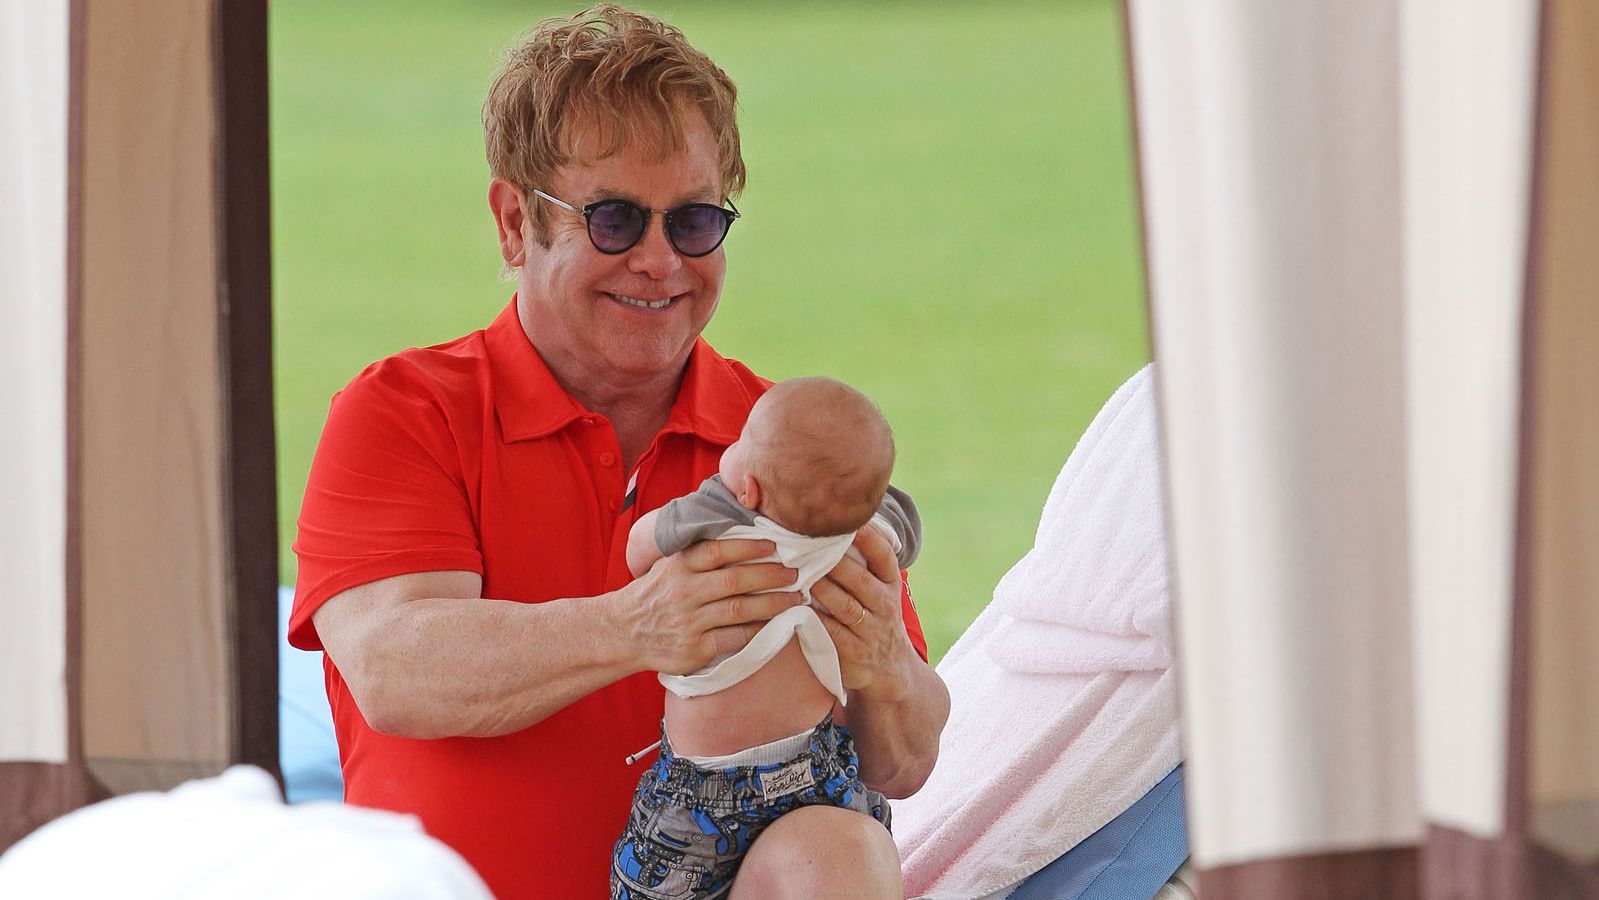 John holds his son Zachary Jackson Levon in 2011. John and his longtime partner, David Furnish, had the baby through a surrogate. They later welcomed a second son to their family, Elijah Joseph Daniel.